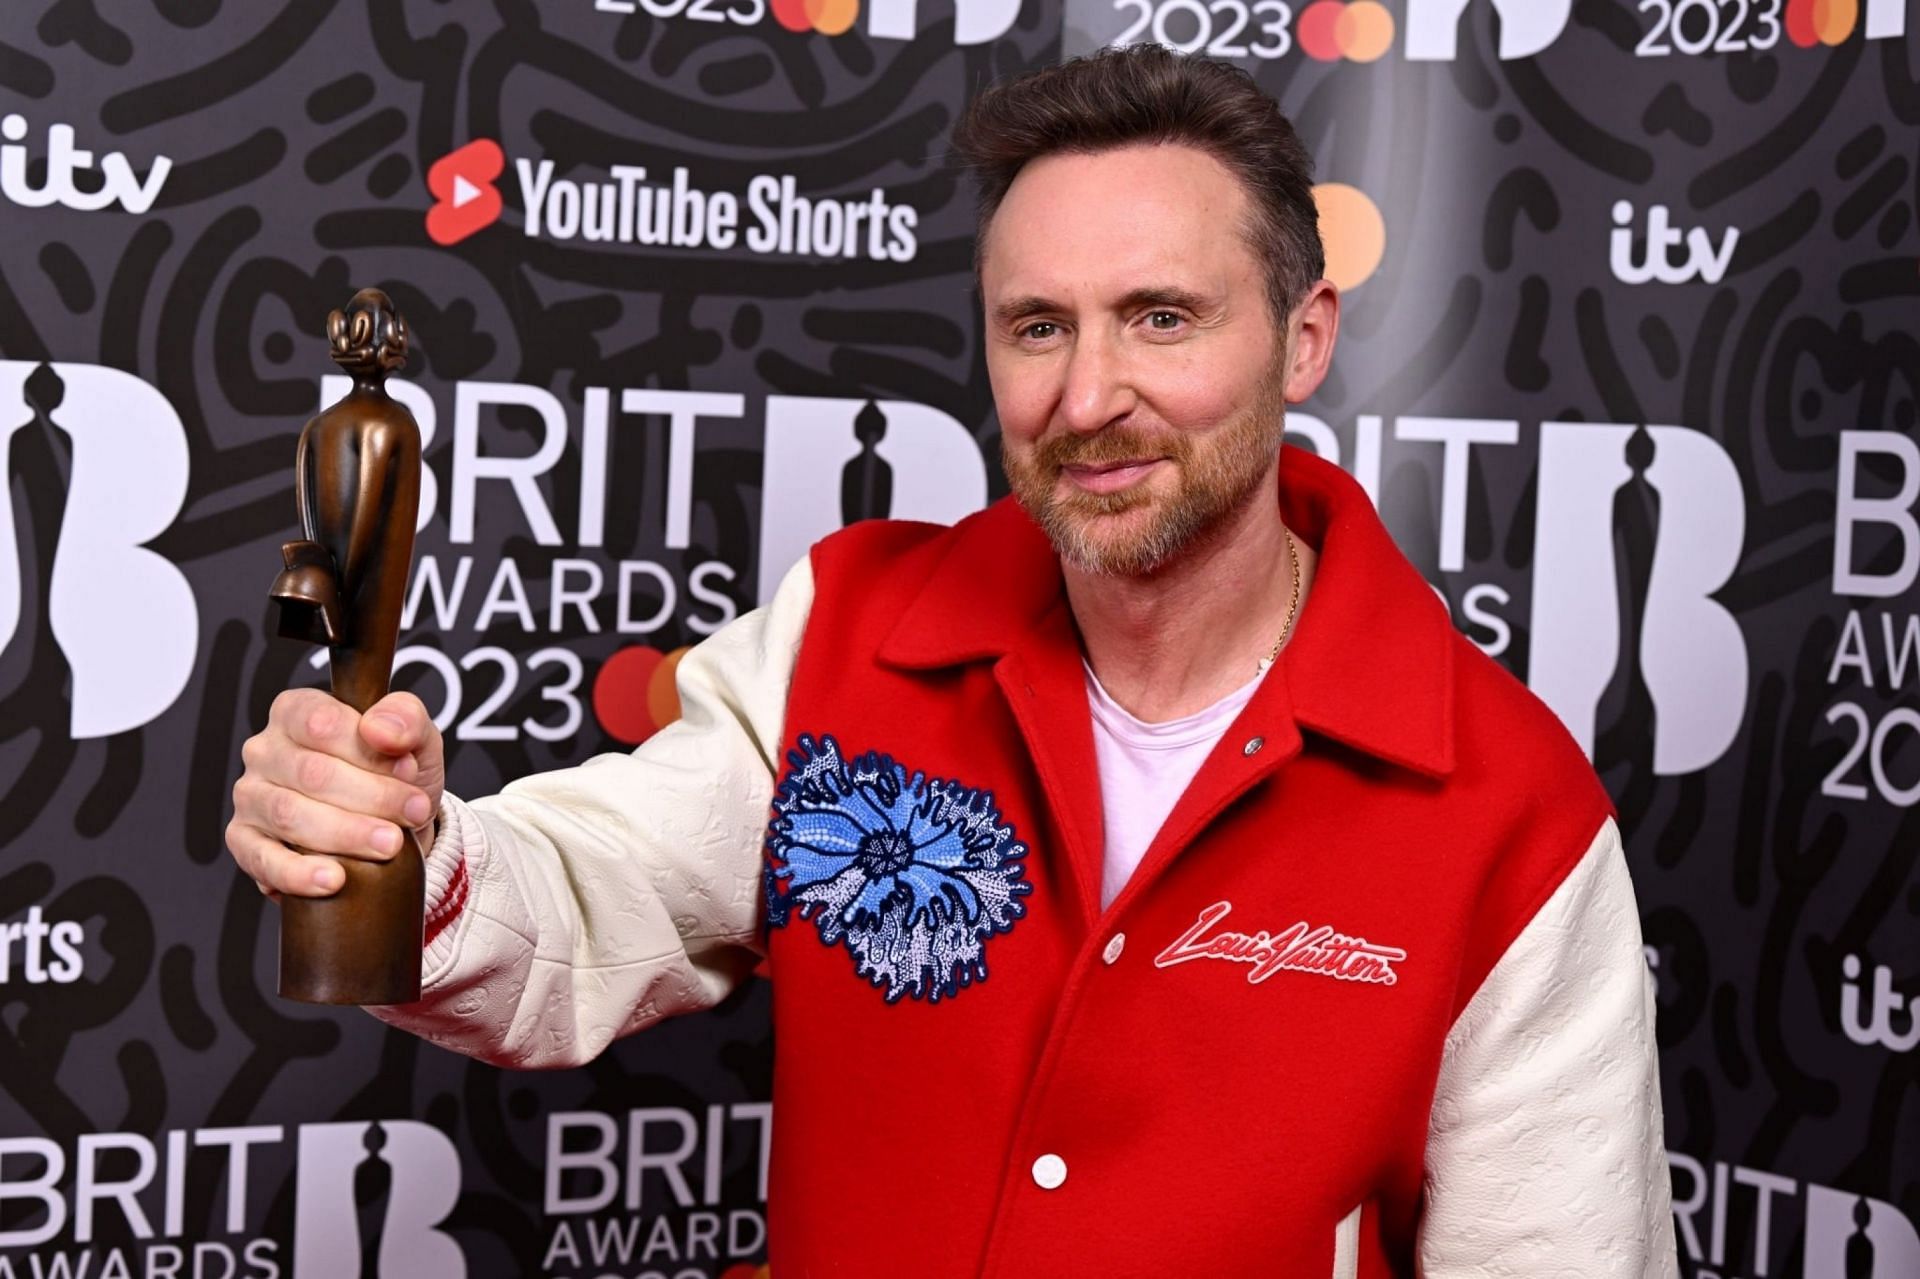  David Guetta poses with the award for Producer of the Year in the media room during The BRIT Awards 2023 at The O2 Arena on February 11, 2023 in London, England(Image via Getty Images)